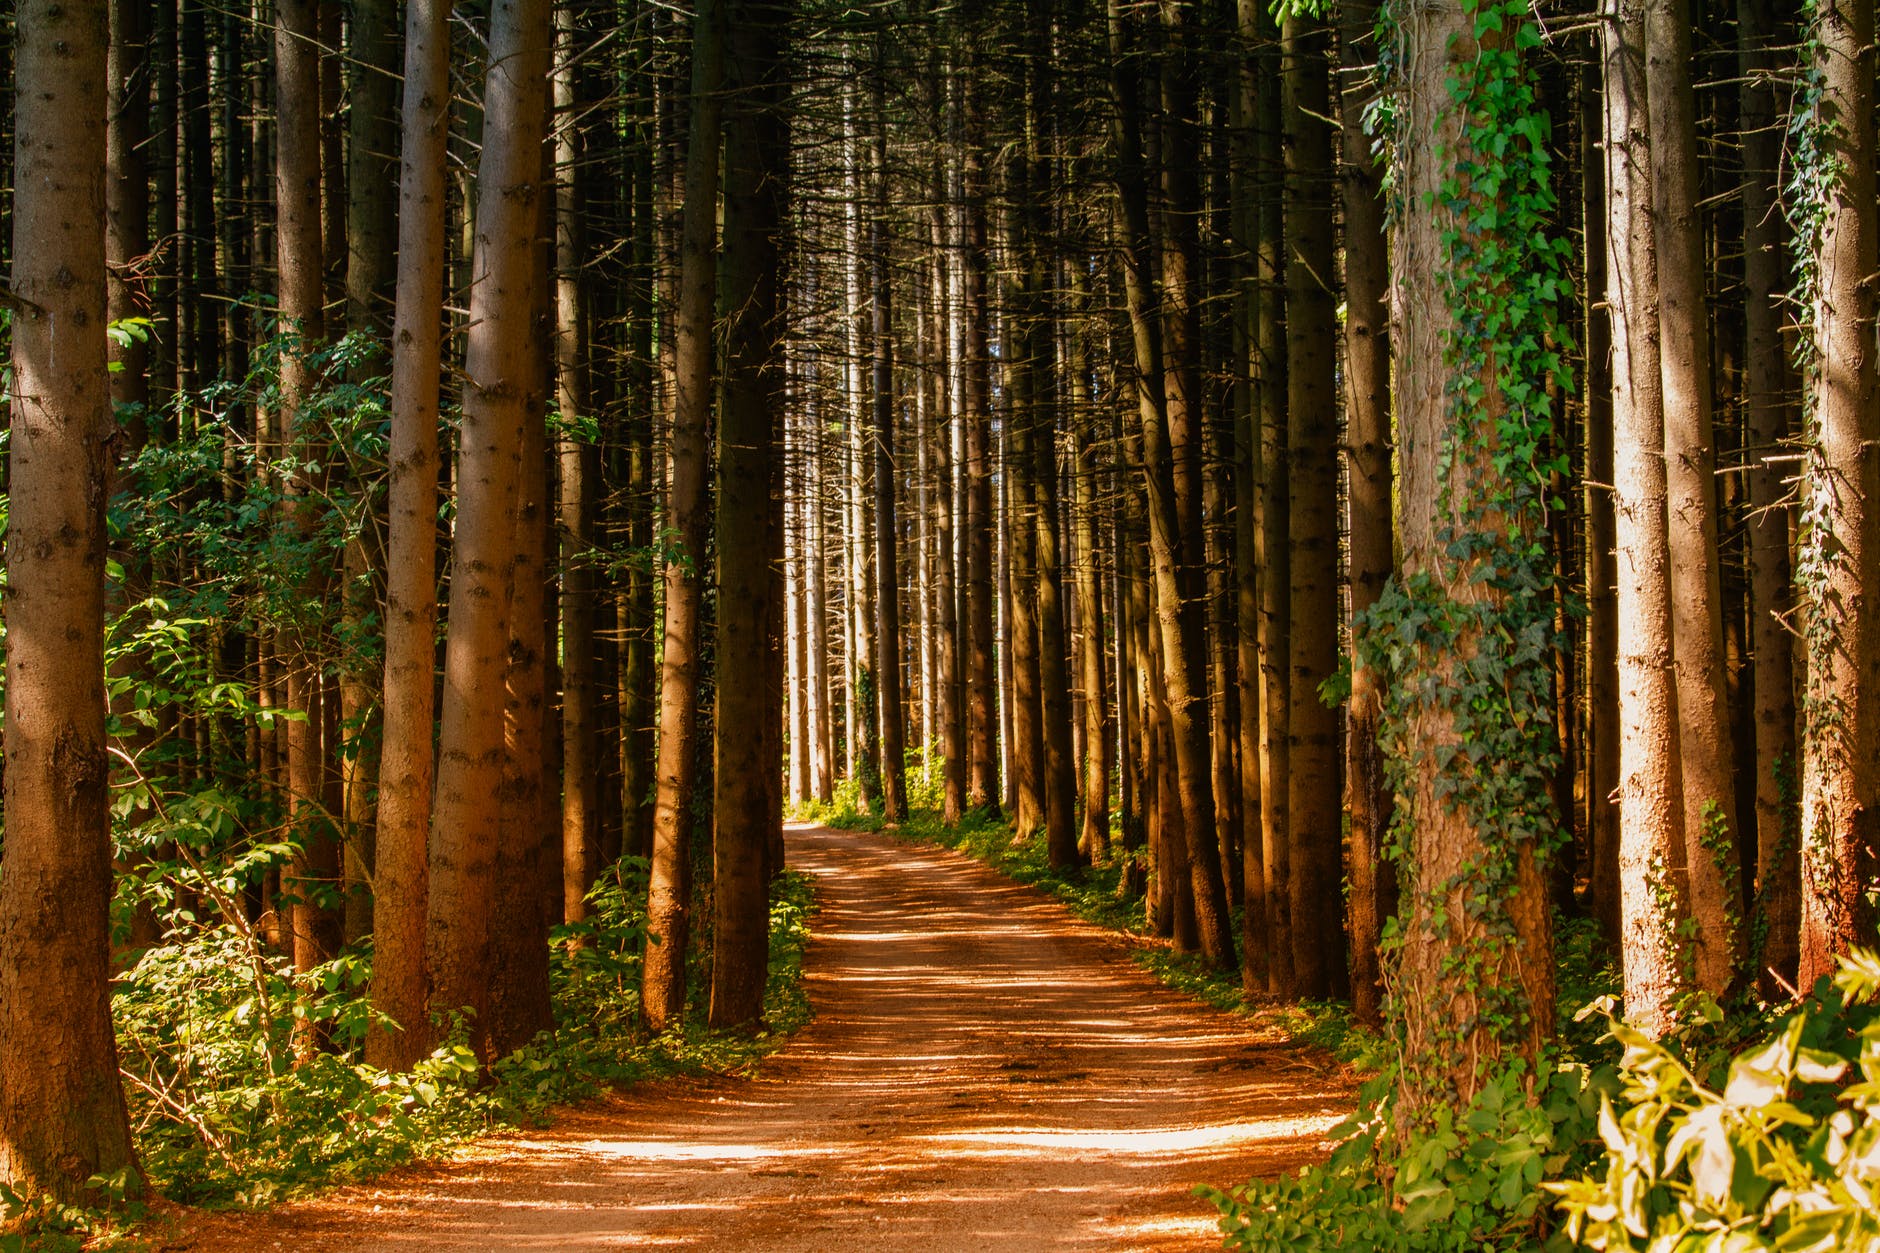 Forest path | Source: Pexels